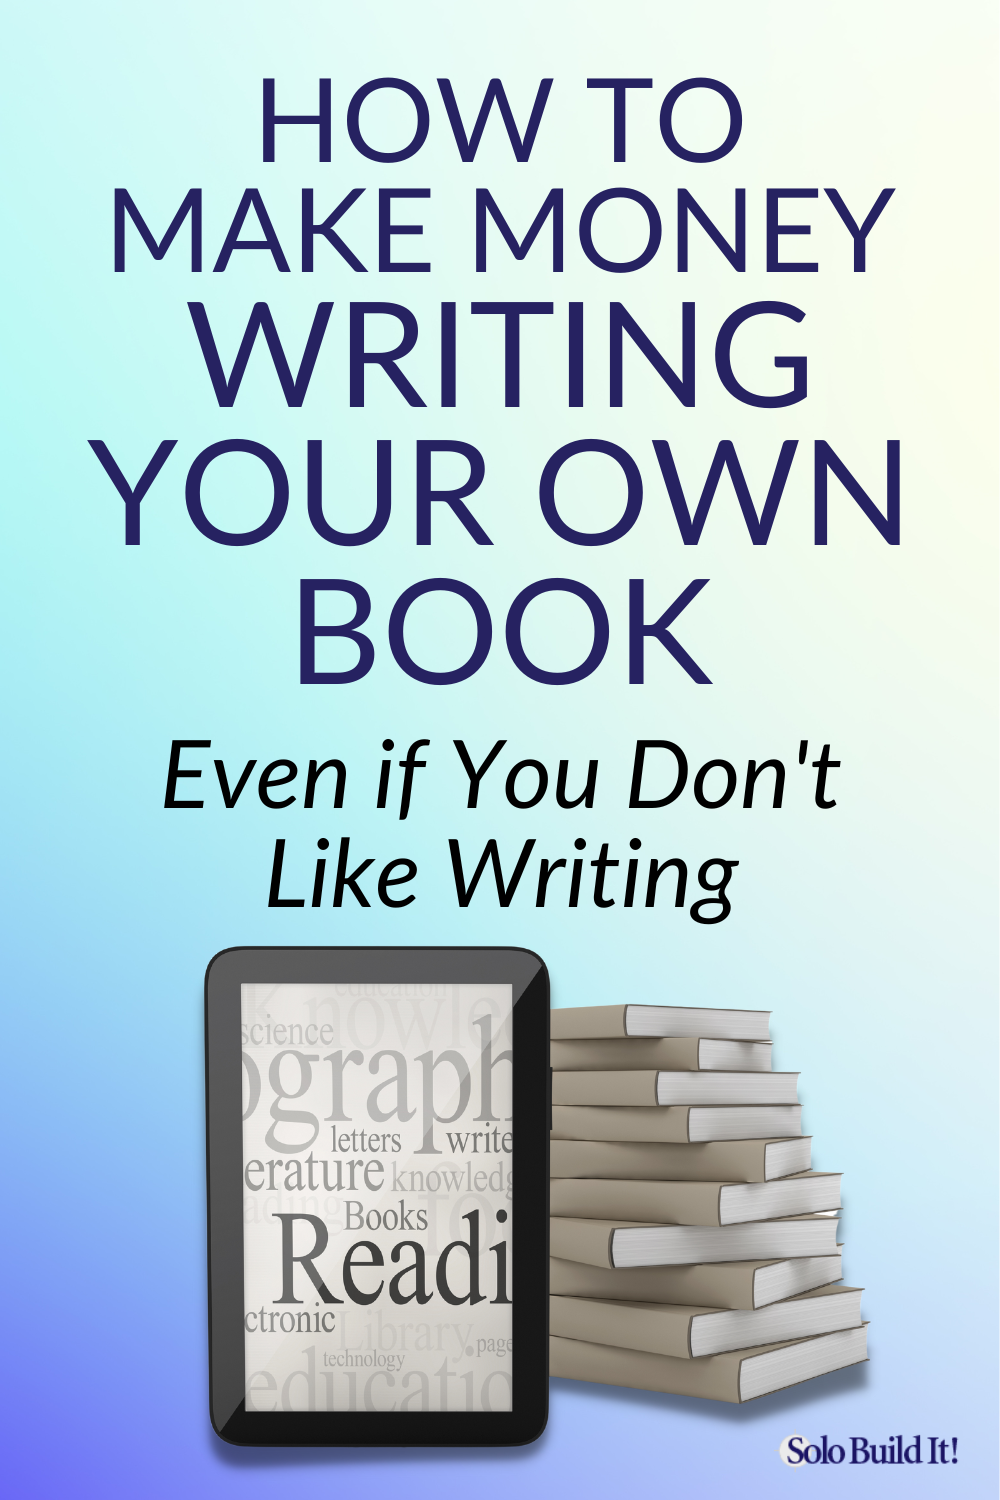 How to Make Money Writing Your Own Book and Selling It on Your Site